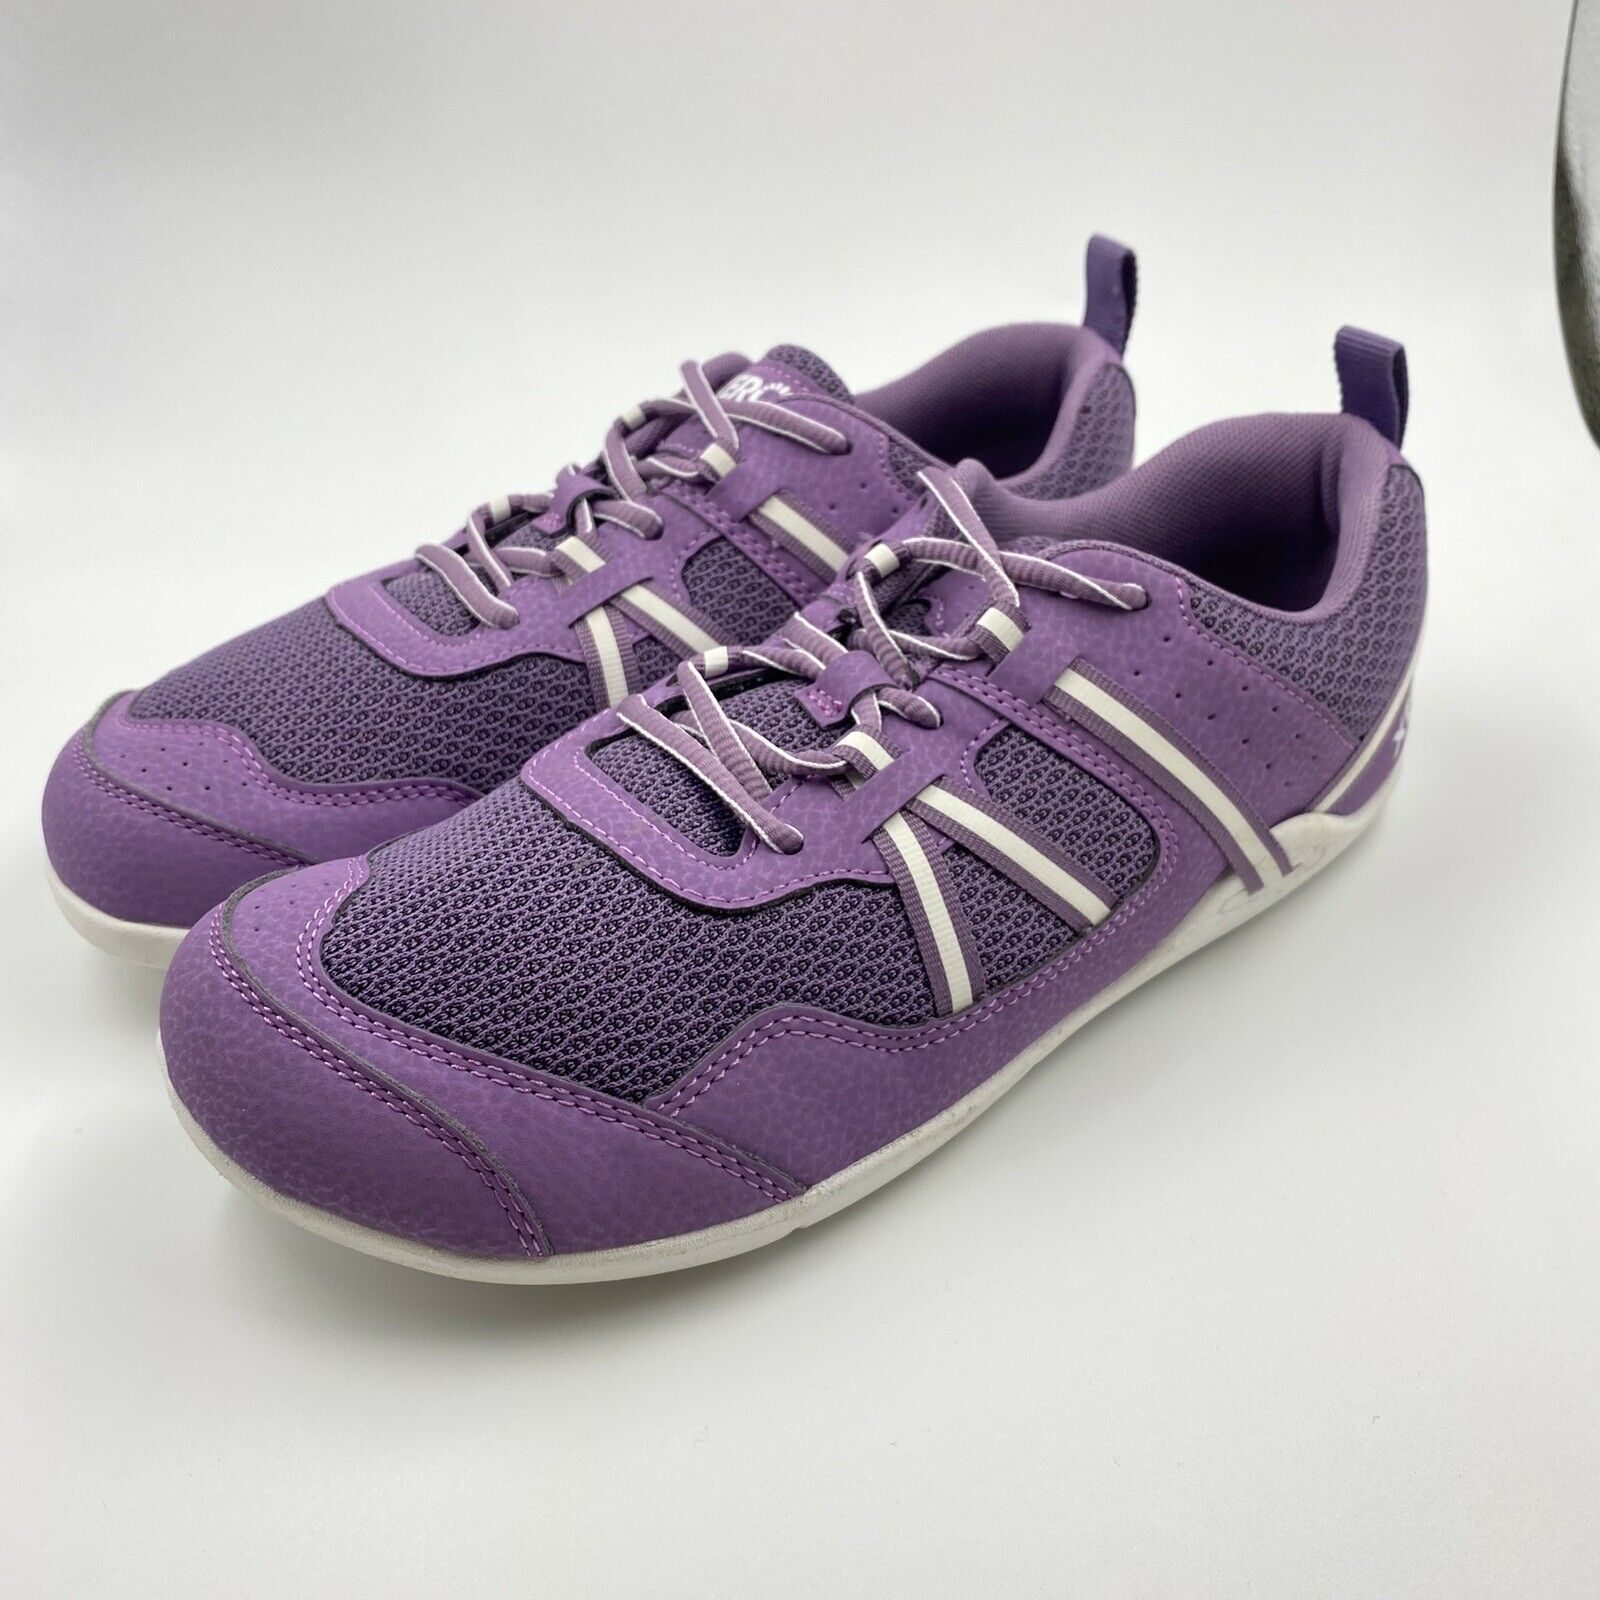 Xero Shoes Womens Prio Purple Cross Training Shoes Size 9 Worn Once